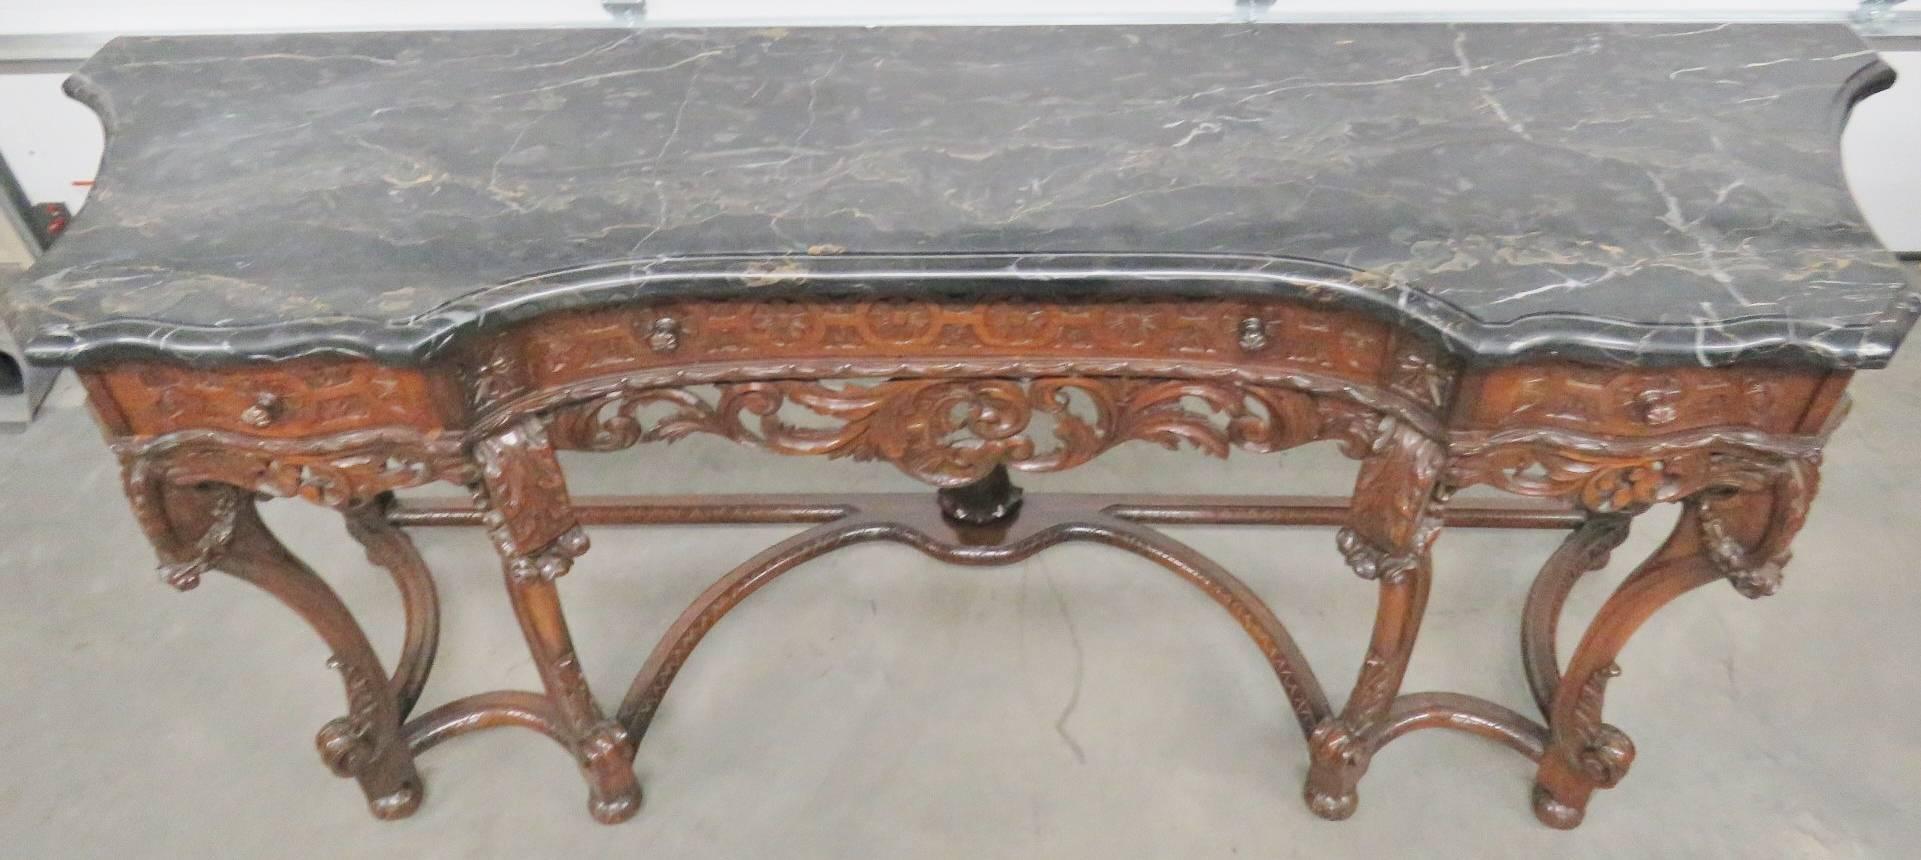 Heavily carved base. Marble top.